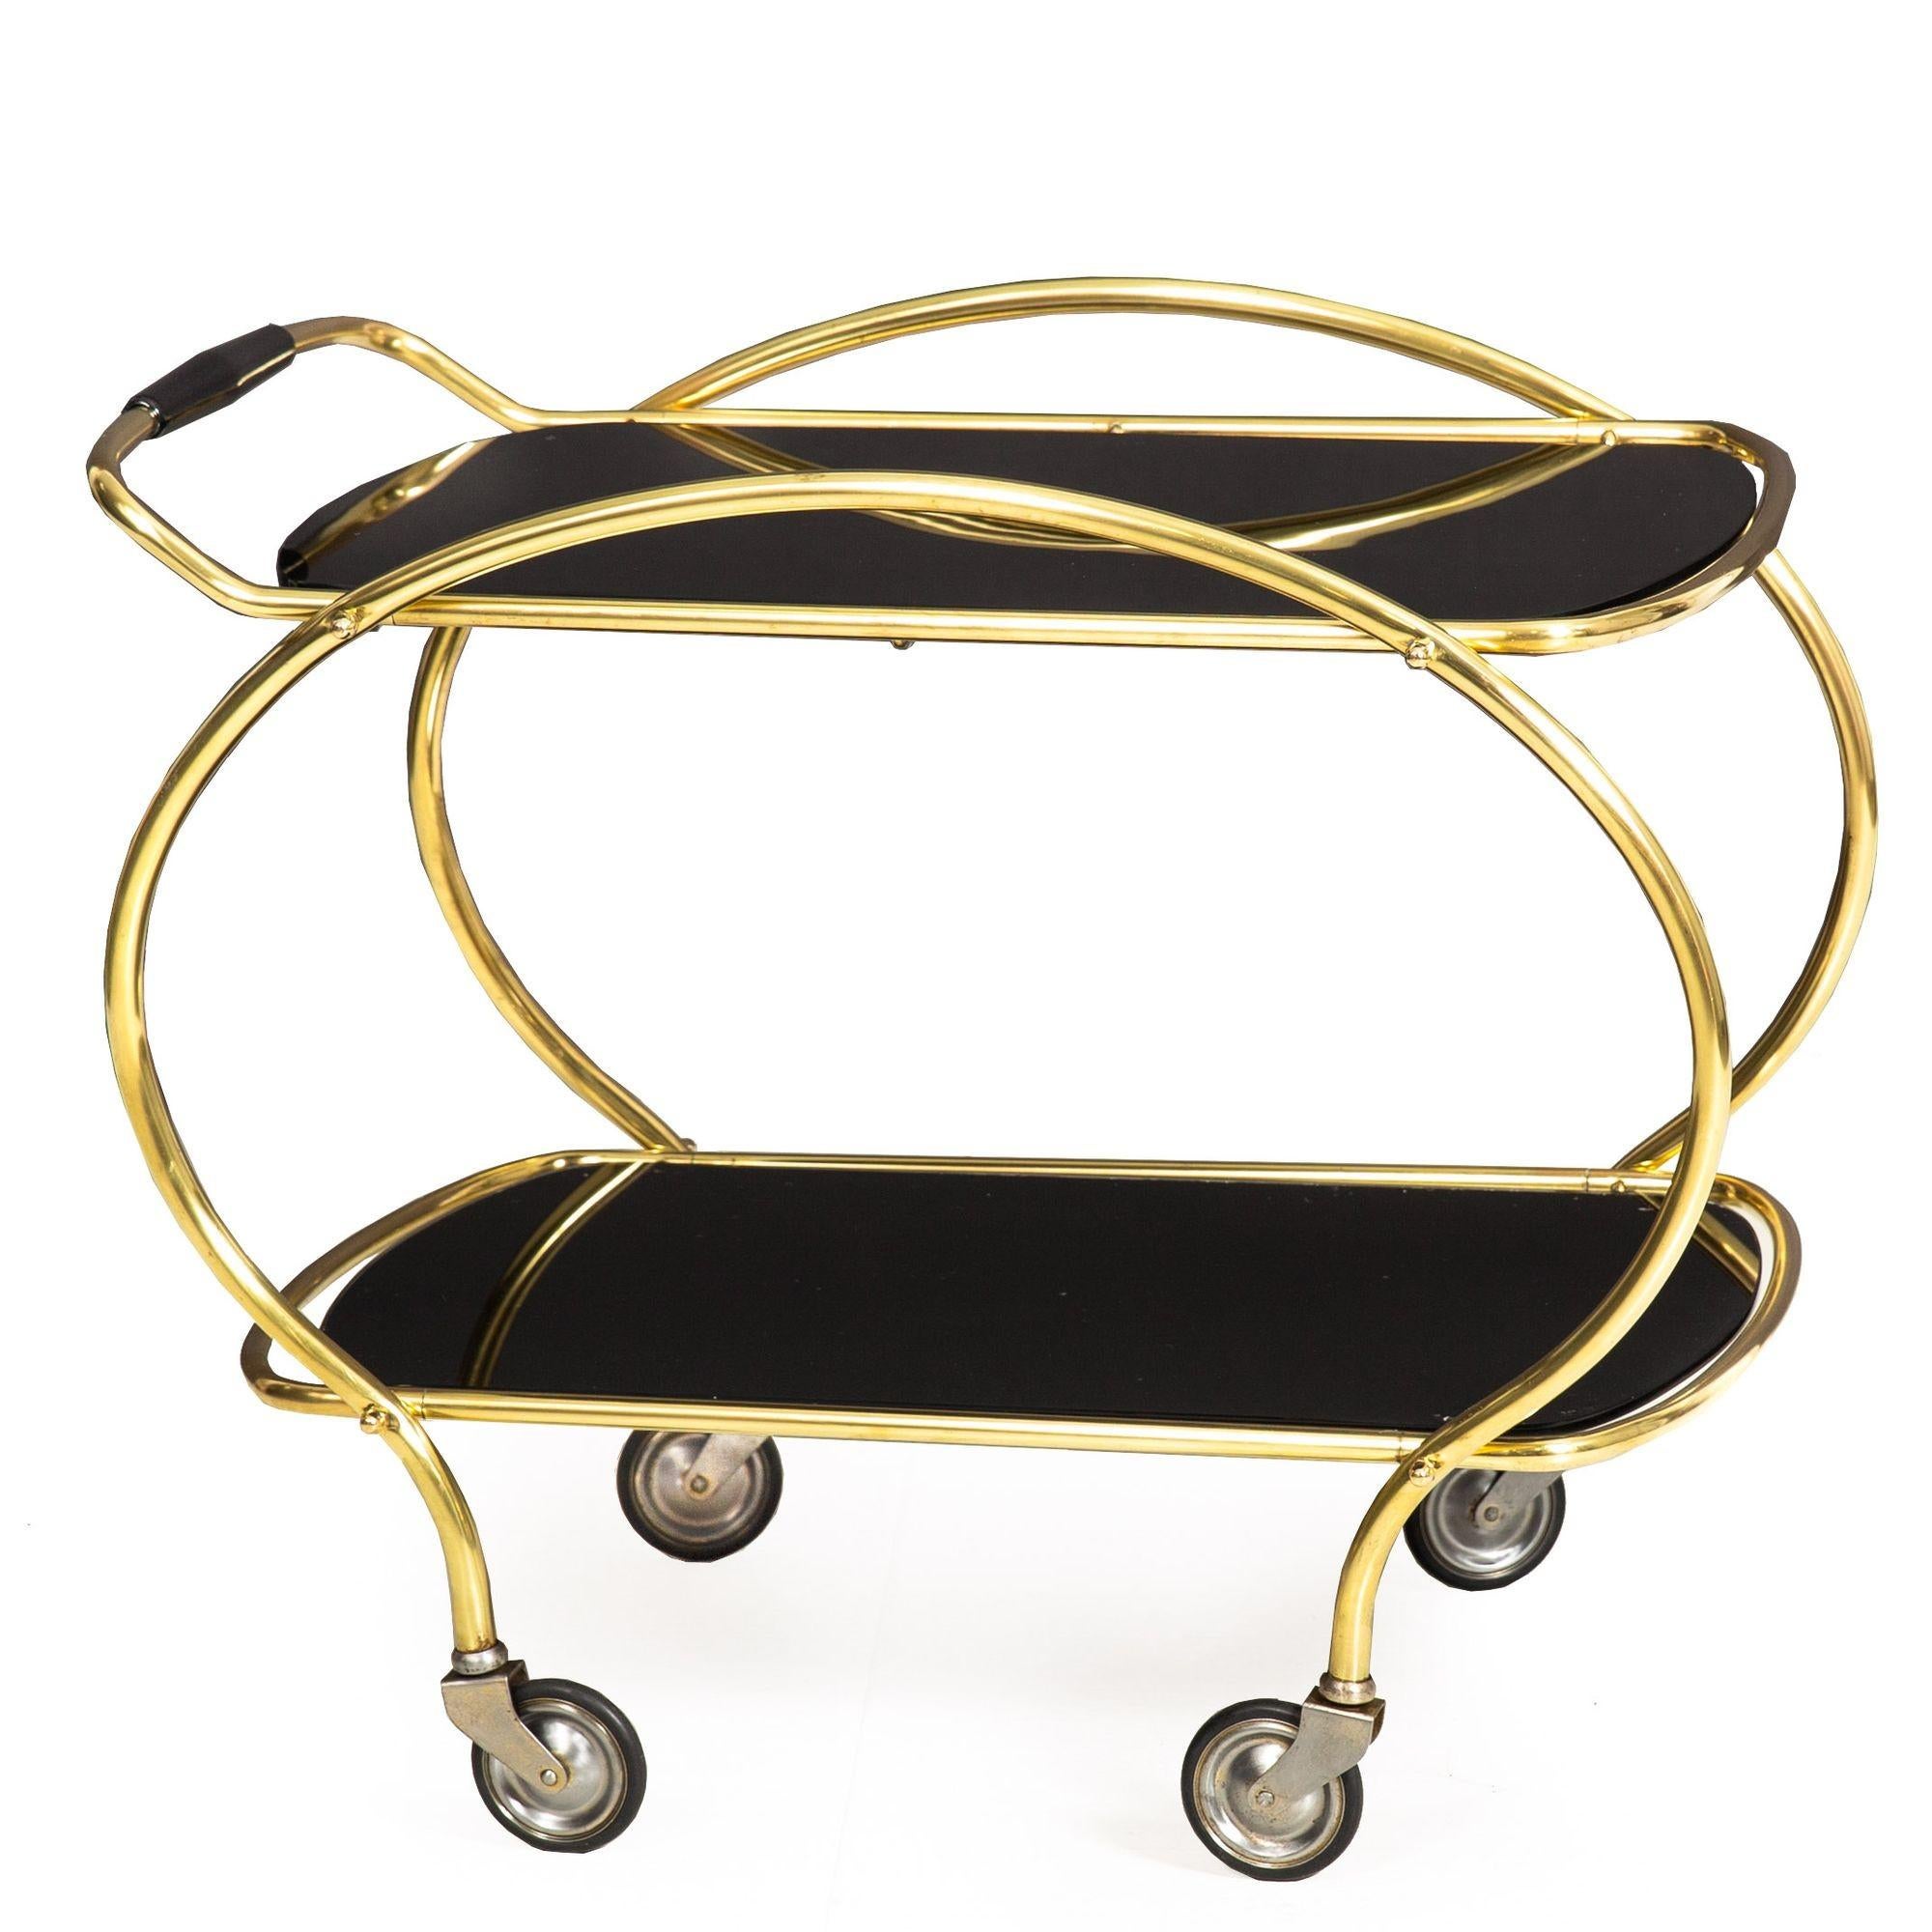 MID-CENTURY BRASS AND BLACK GLASS TWO-TIER SERVING CART
Probably United States, circa 1950s
Item # 311WGP02K

A super fun curvy two-tier bar cart from the 1950s, it has a distinctly 